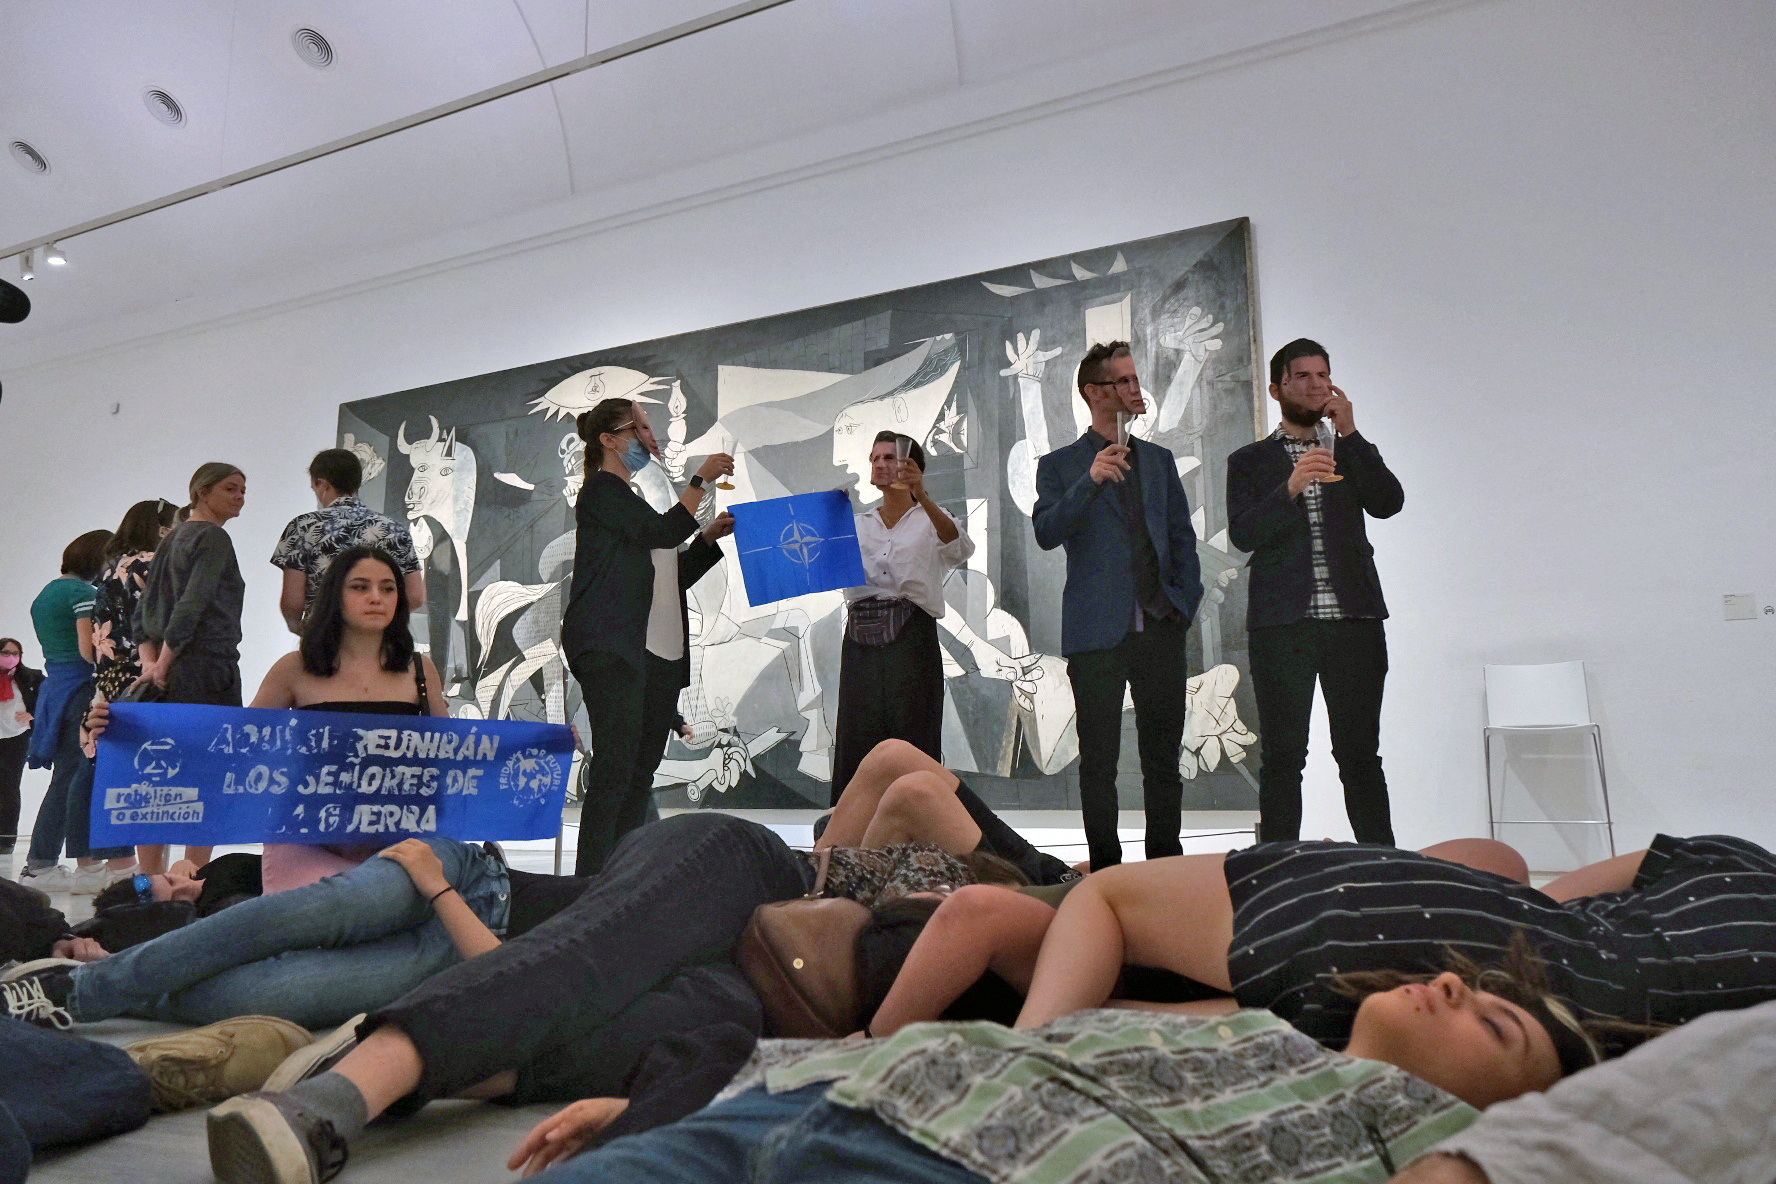 Extinction Rebellion stage a protest at famous Guernica painting at Reina Sofia museum